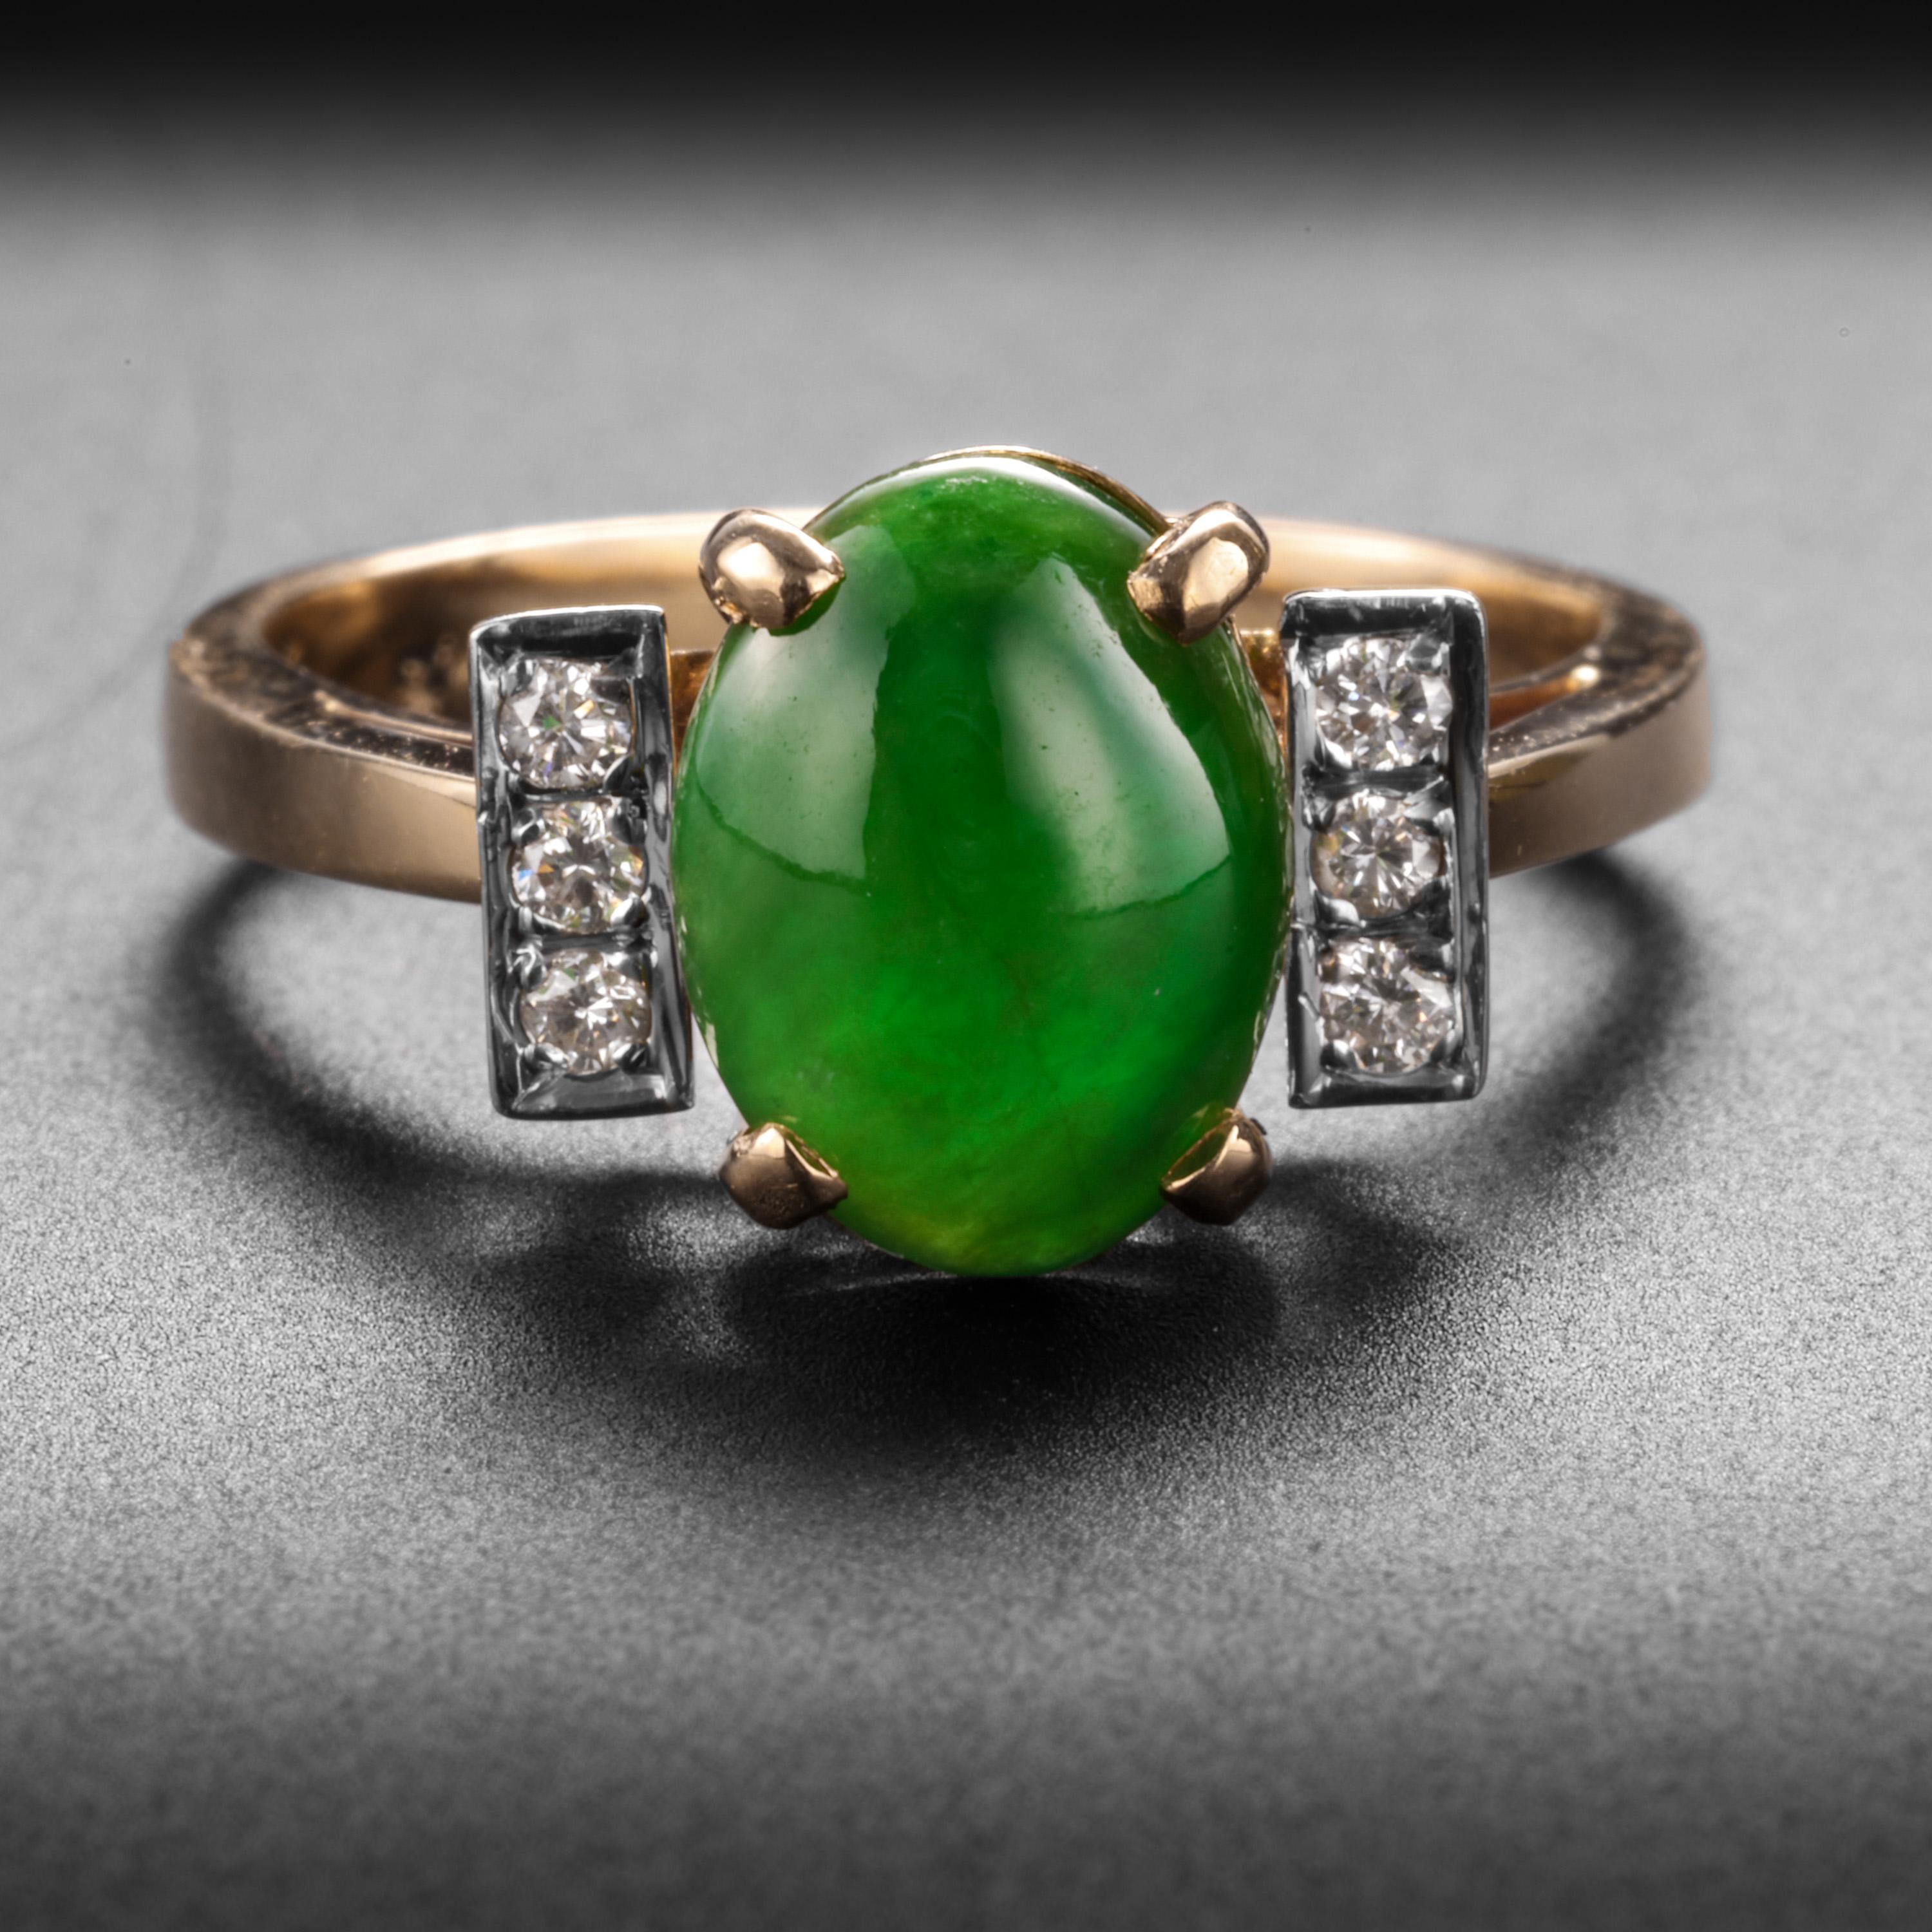 This sweet and beautiful 14K yellow gold engagement ring features a prong-set emerald-green double-cabochon of natural, untreated jadeite jade. The gorgeous stone measures 9.54 x 7.21 x 3.43mm. Three sparkly little .02-carat diamonds are set within